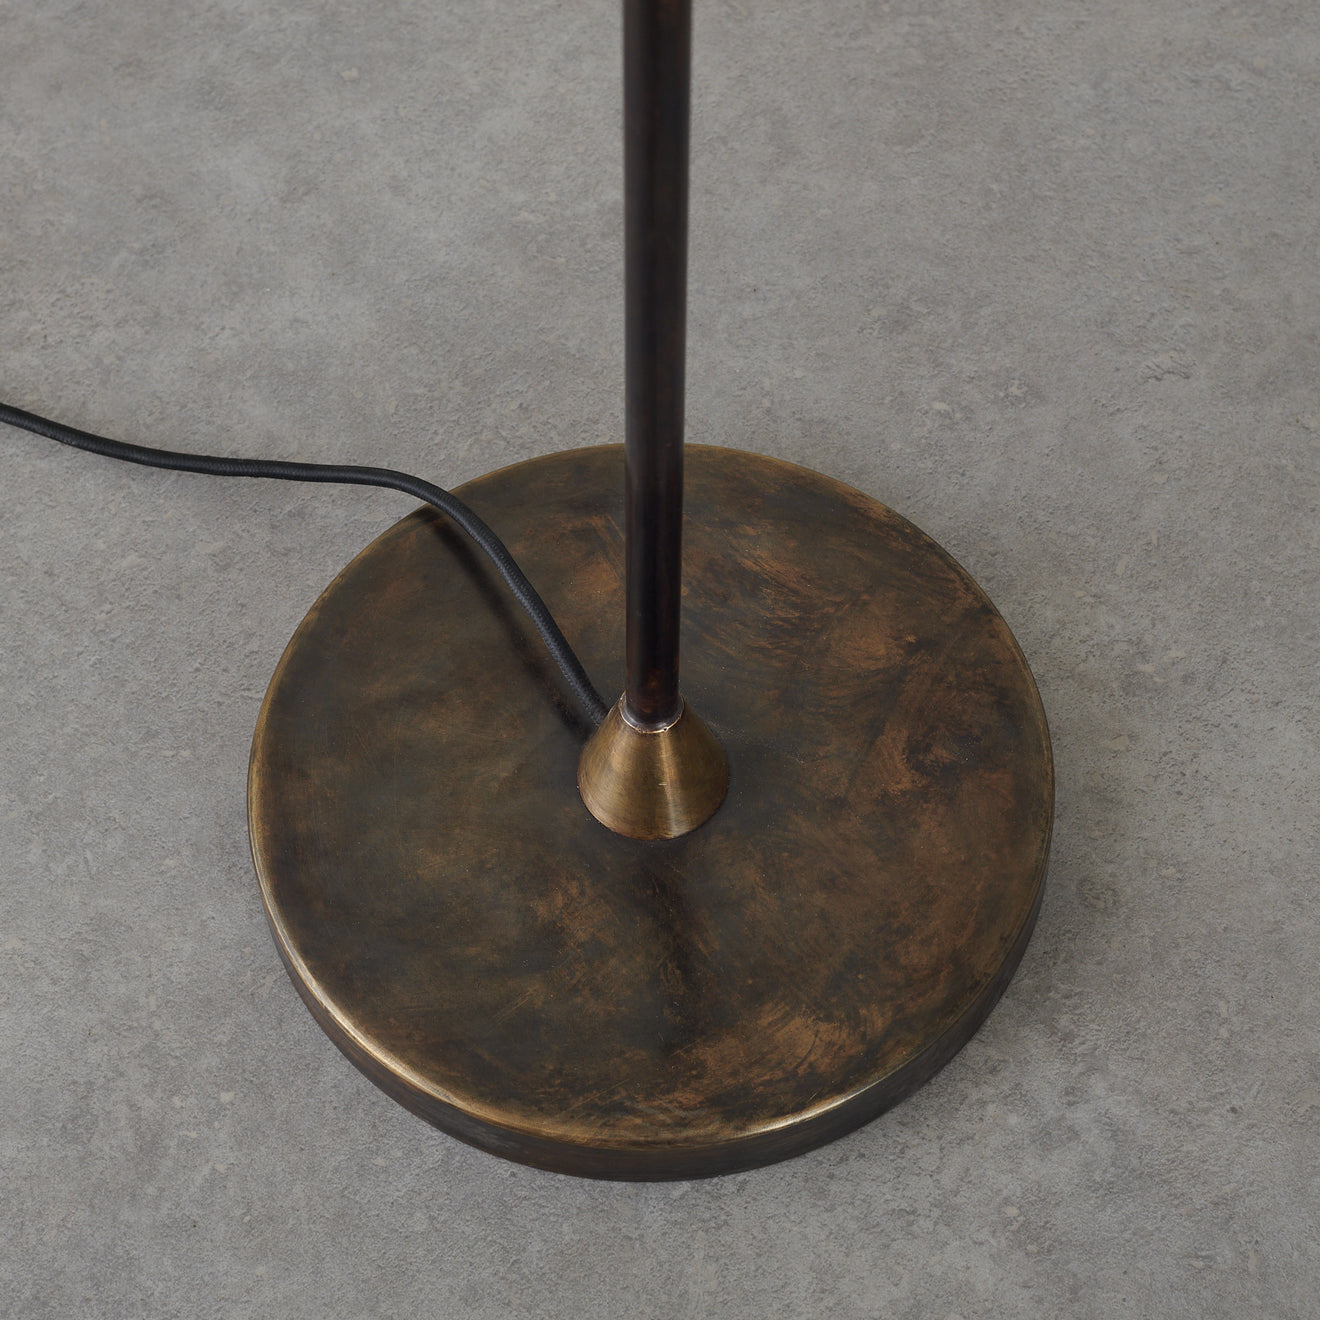 TROIG II FLOOR LAMP BY THIERRY JEANNOT